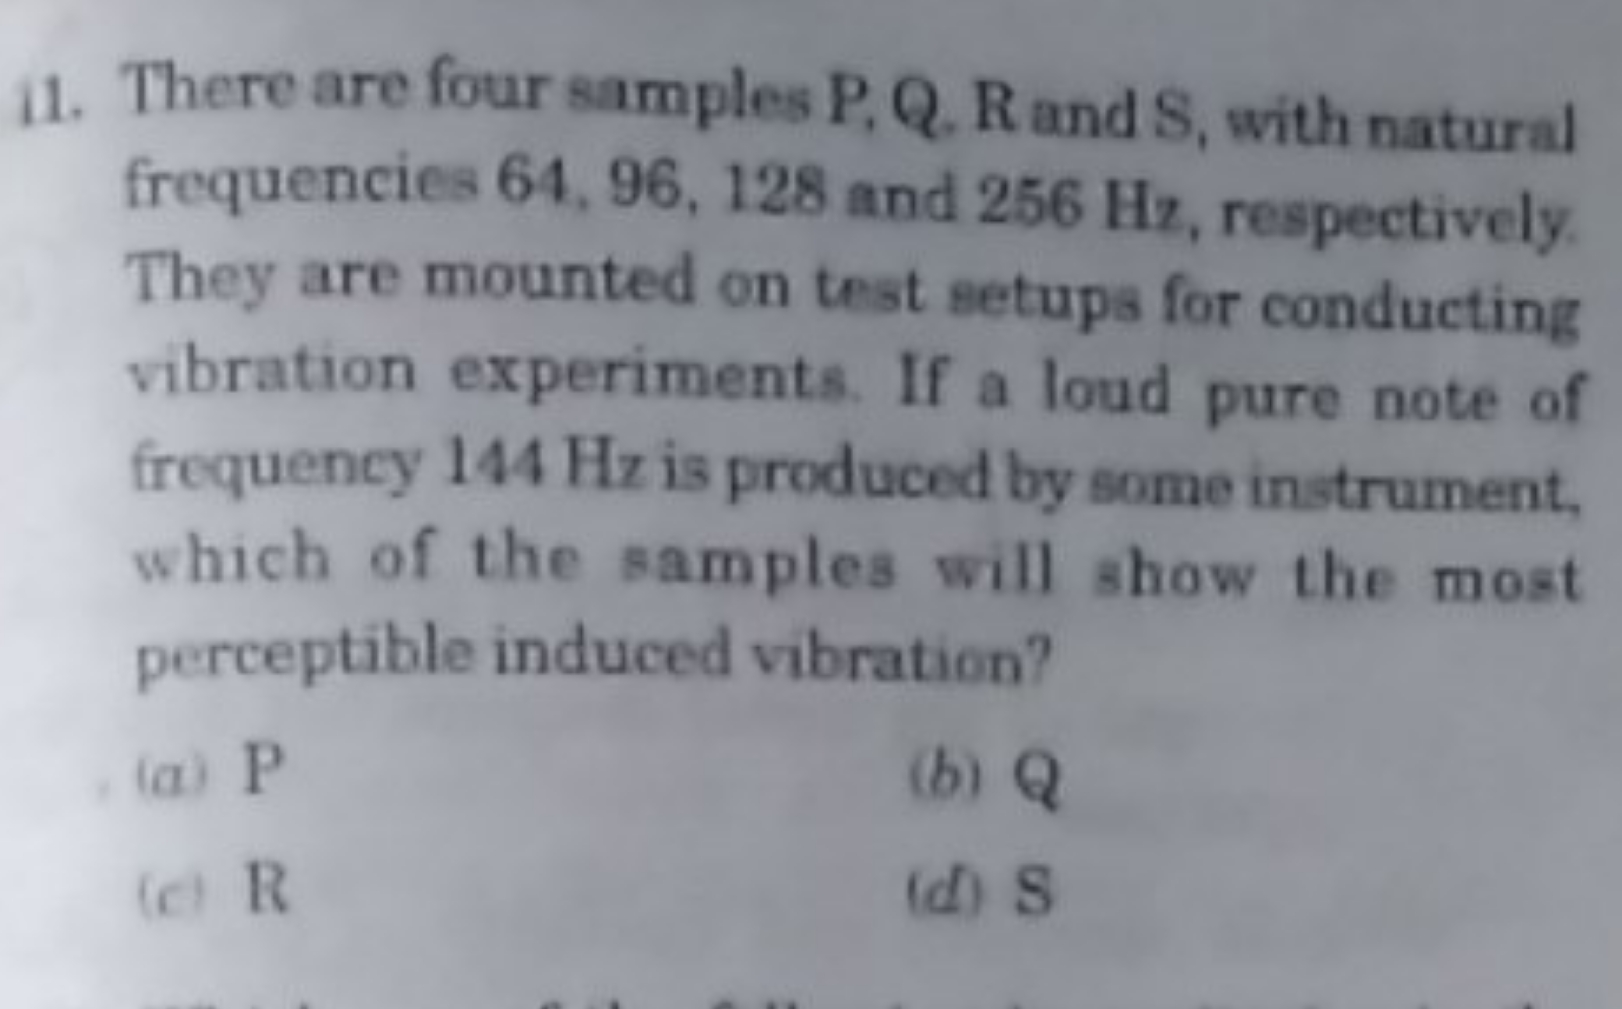 There are four samples P,Q,R and S, with natural frequencies 64,96,128